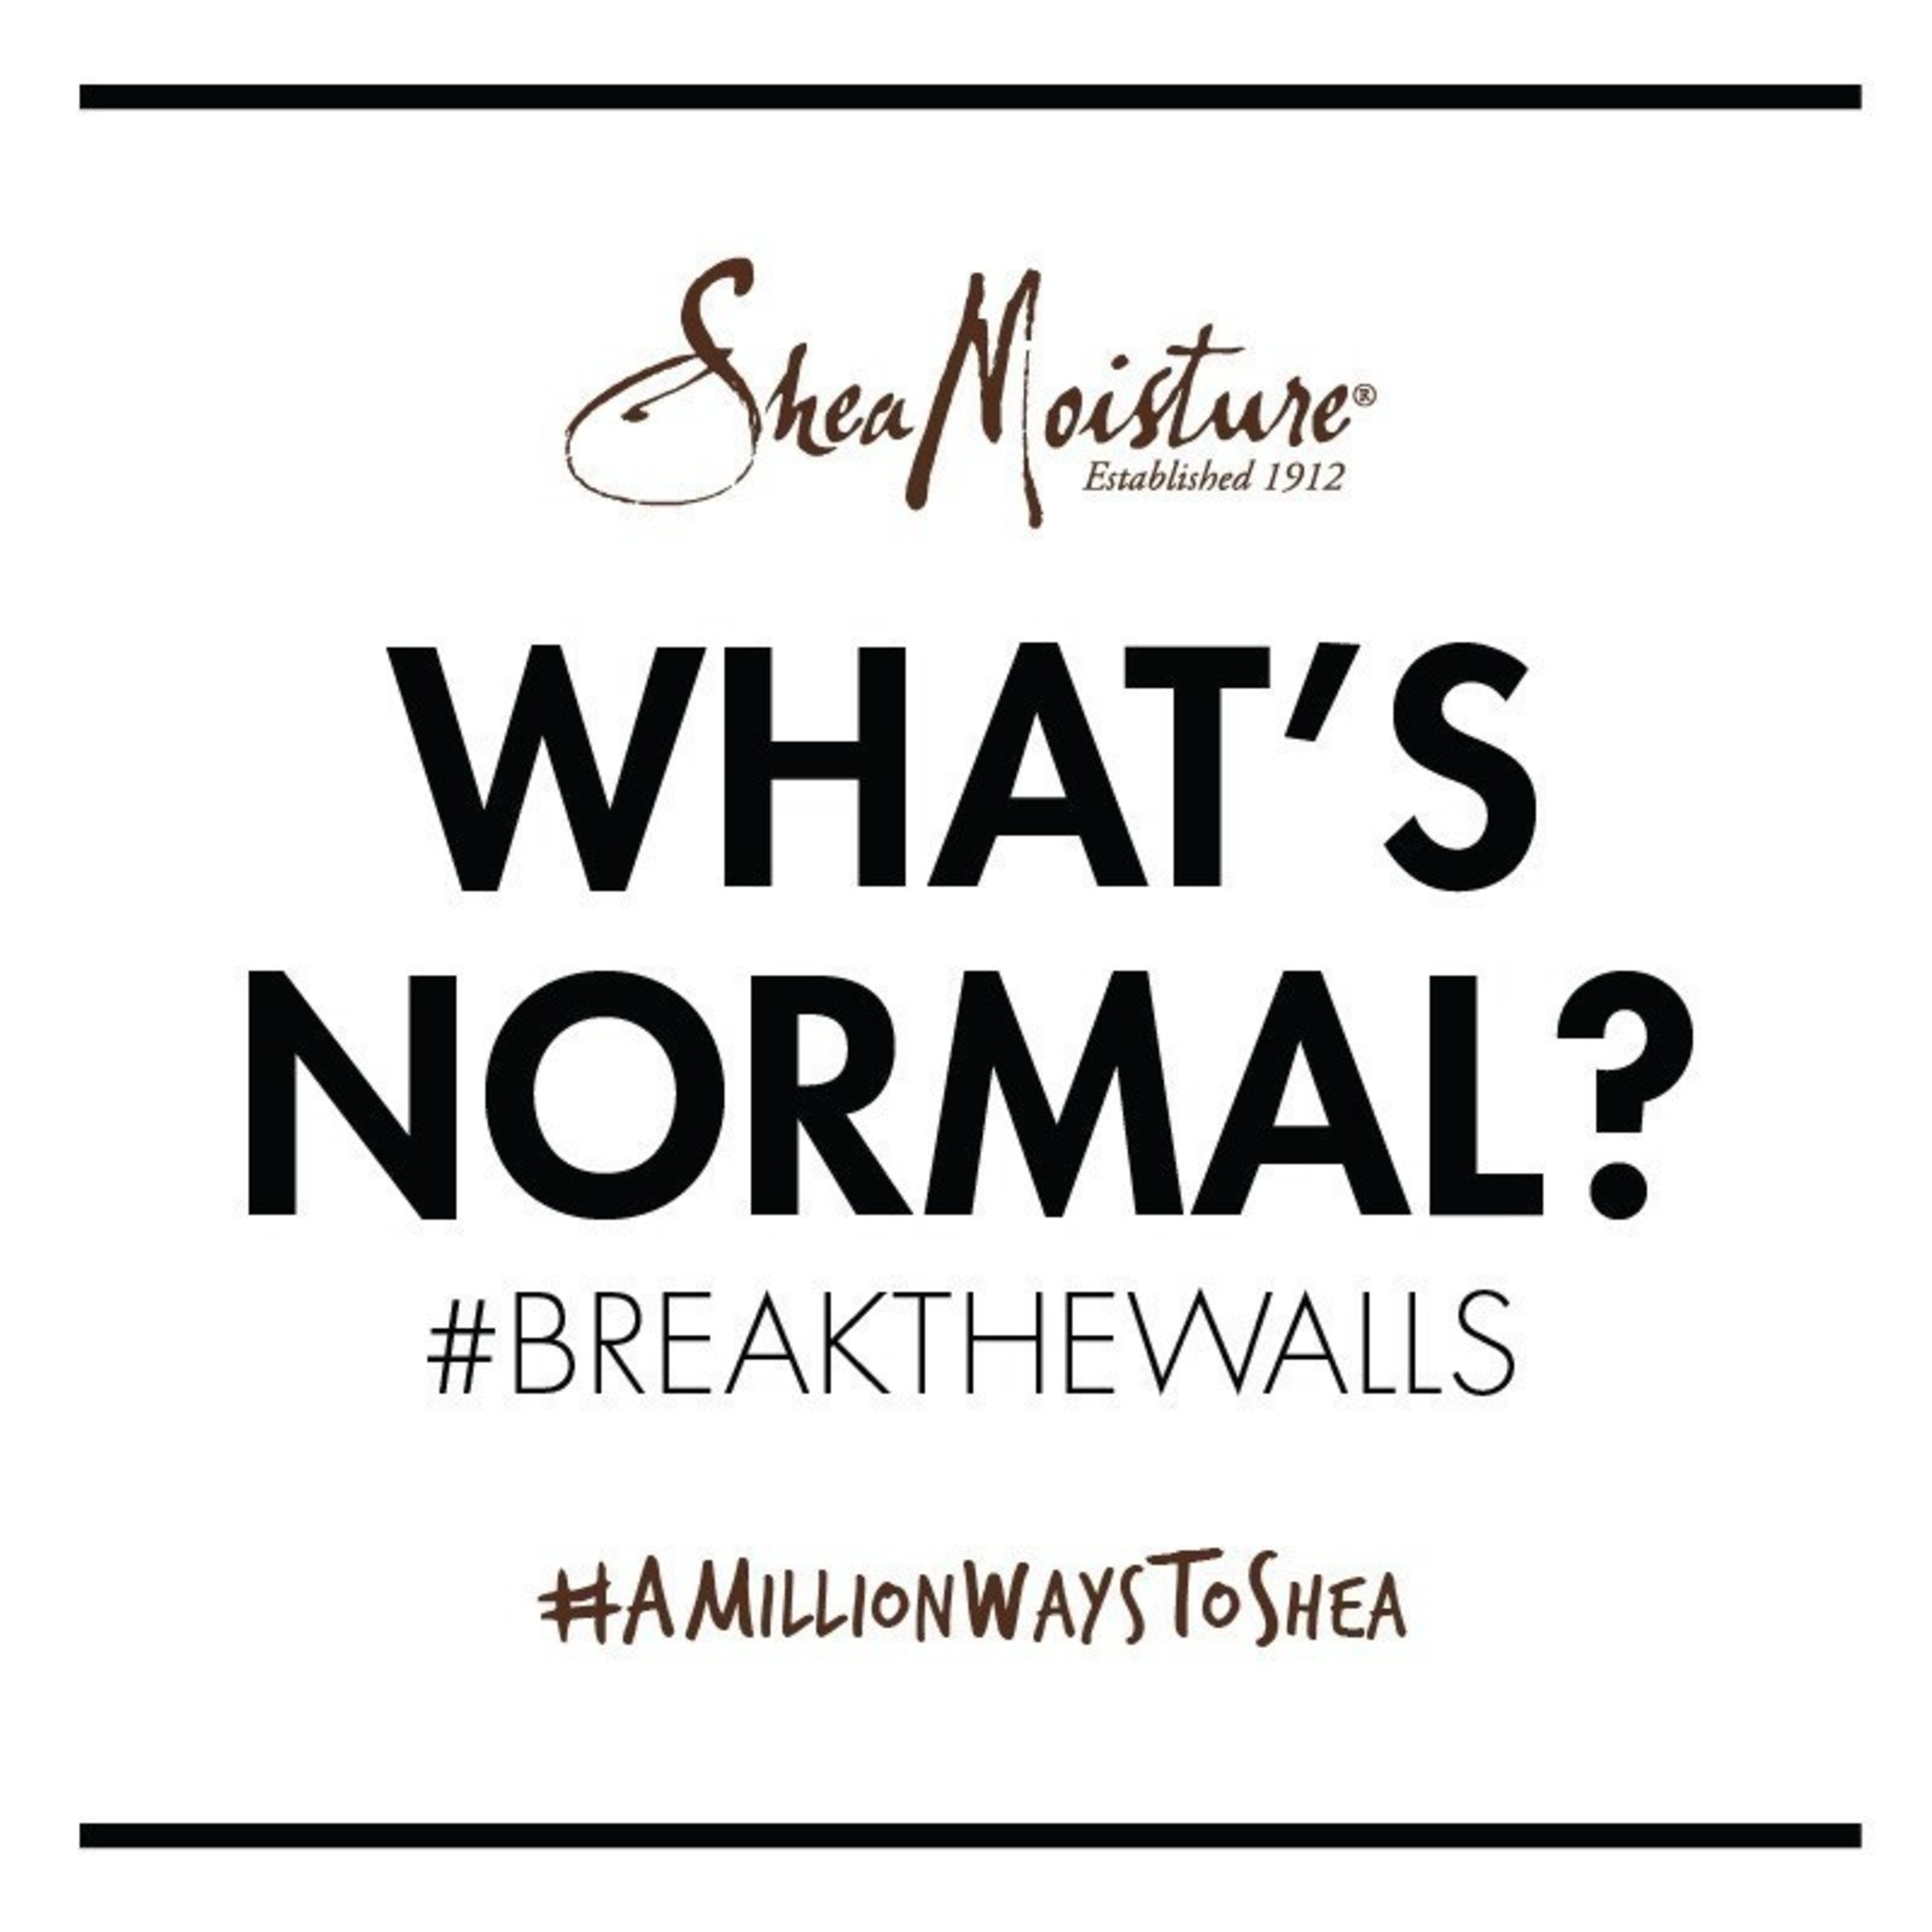 SheaMoisture Launches Second Phase of Its Iconic #BreakTheWalls Call-to-Action and Challenges Beauty Industry Standards with One Question: What's Normal?